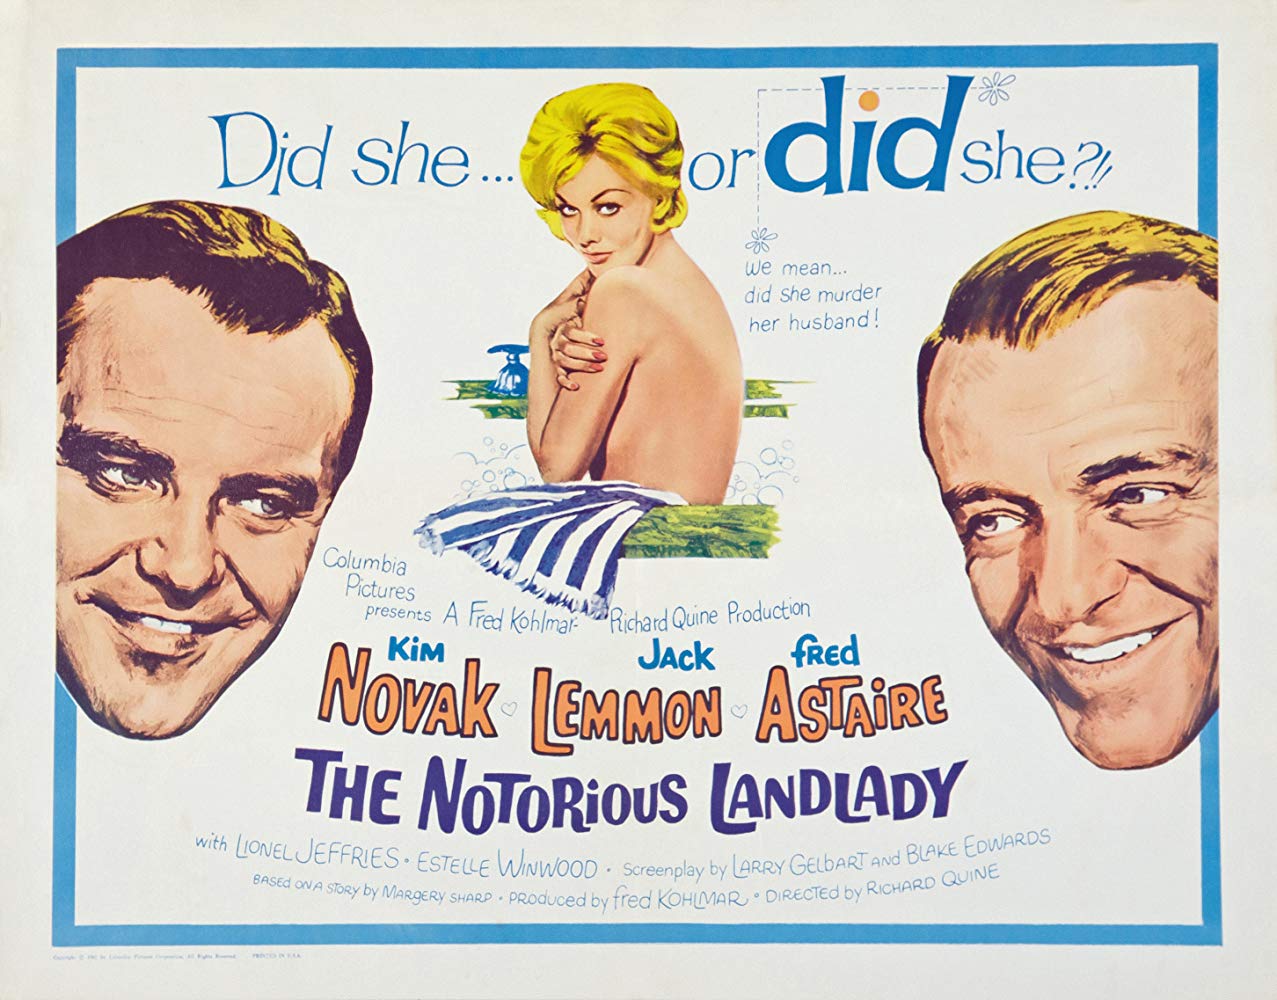 An illustrated poster for the film The Notorious Landlady. Superimposed to either side of the title are close-ups of Jack Lemmon and Fred Astaire. In the center is Kim Novak with her back turned and looking over her shoulder. She is topless (*sigh*)